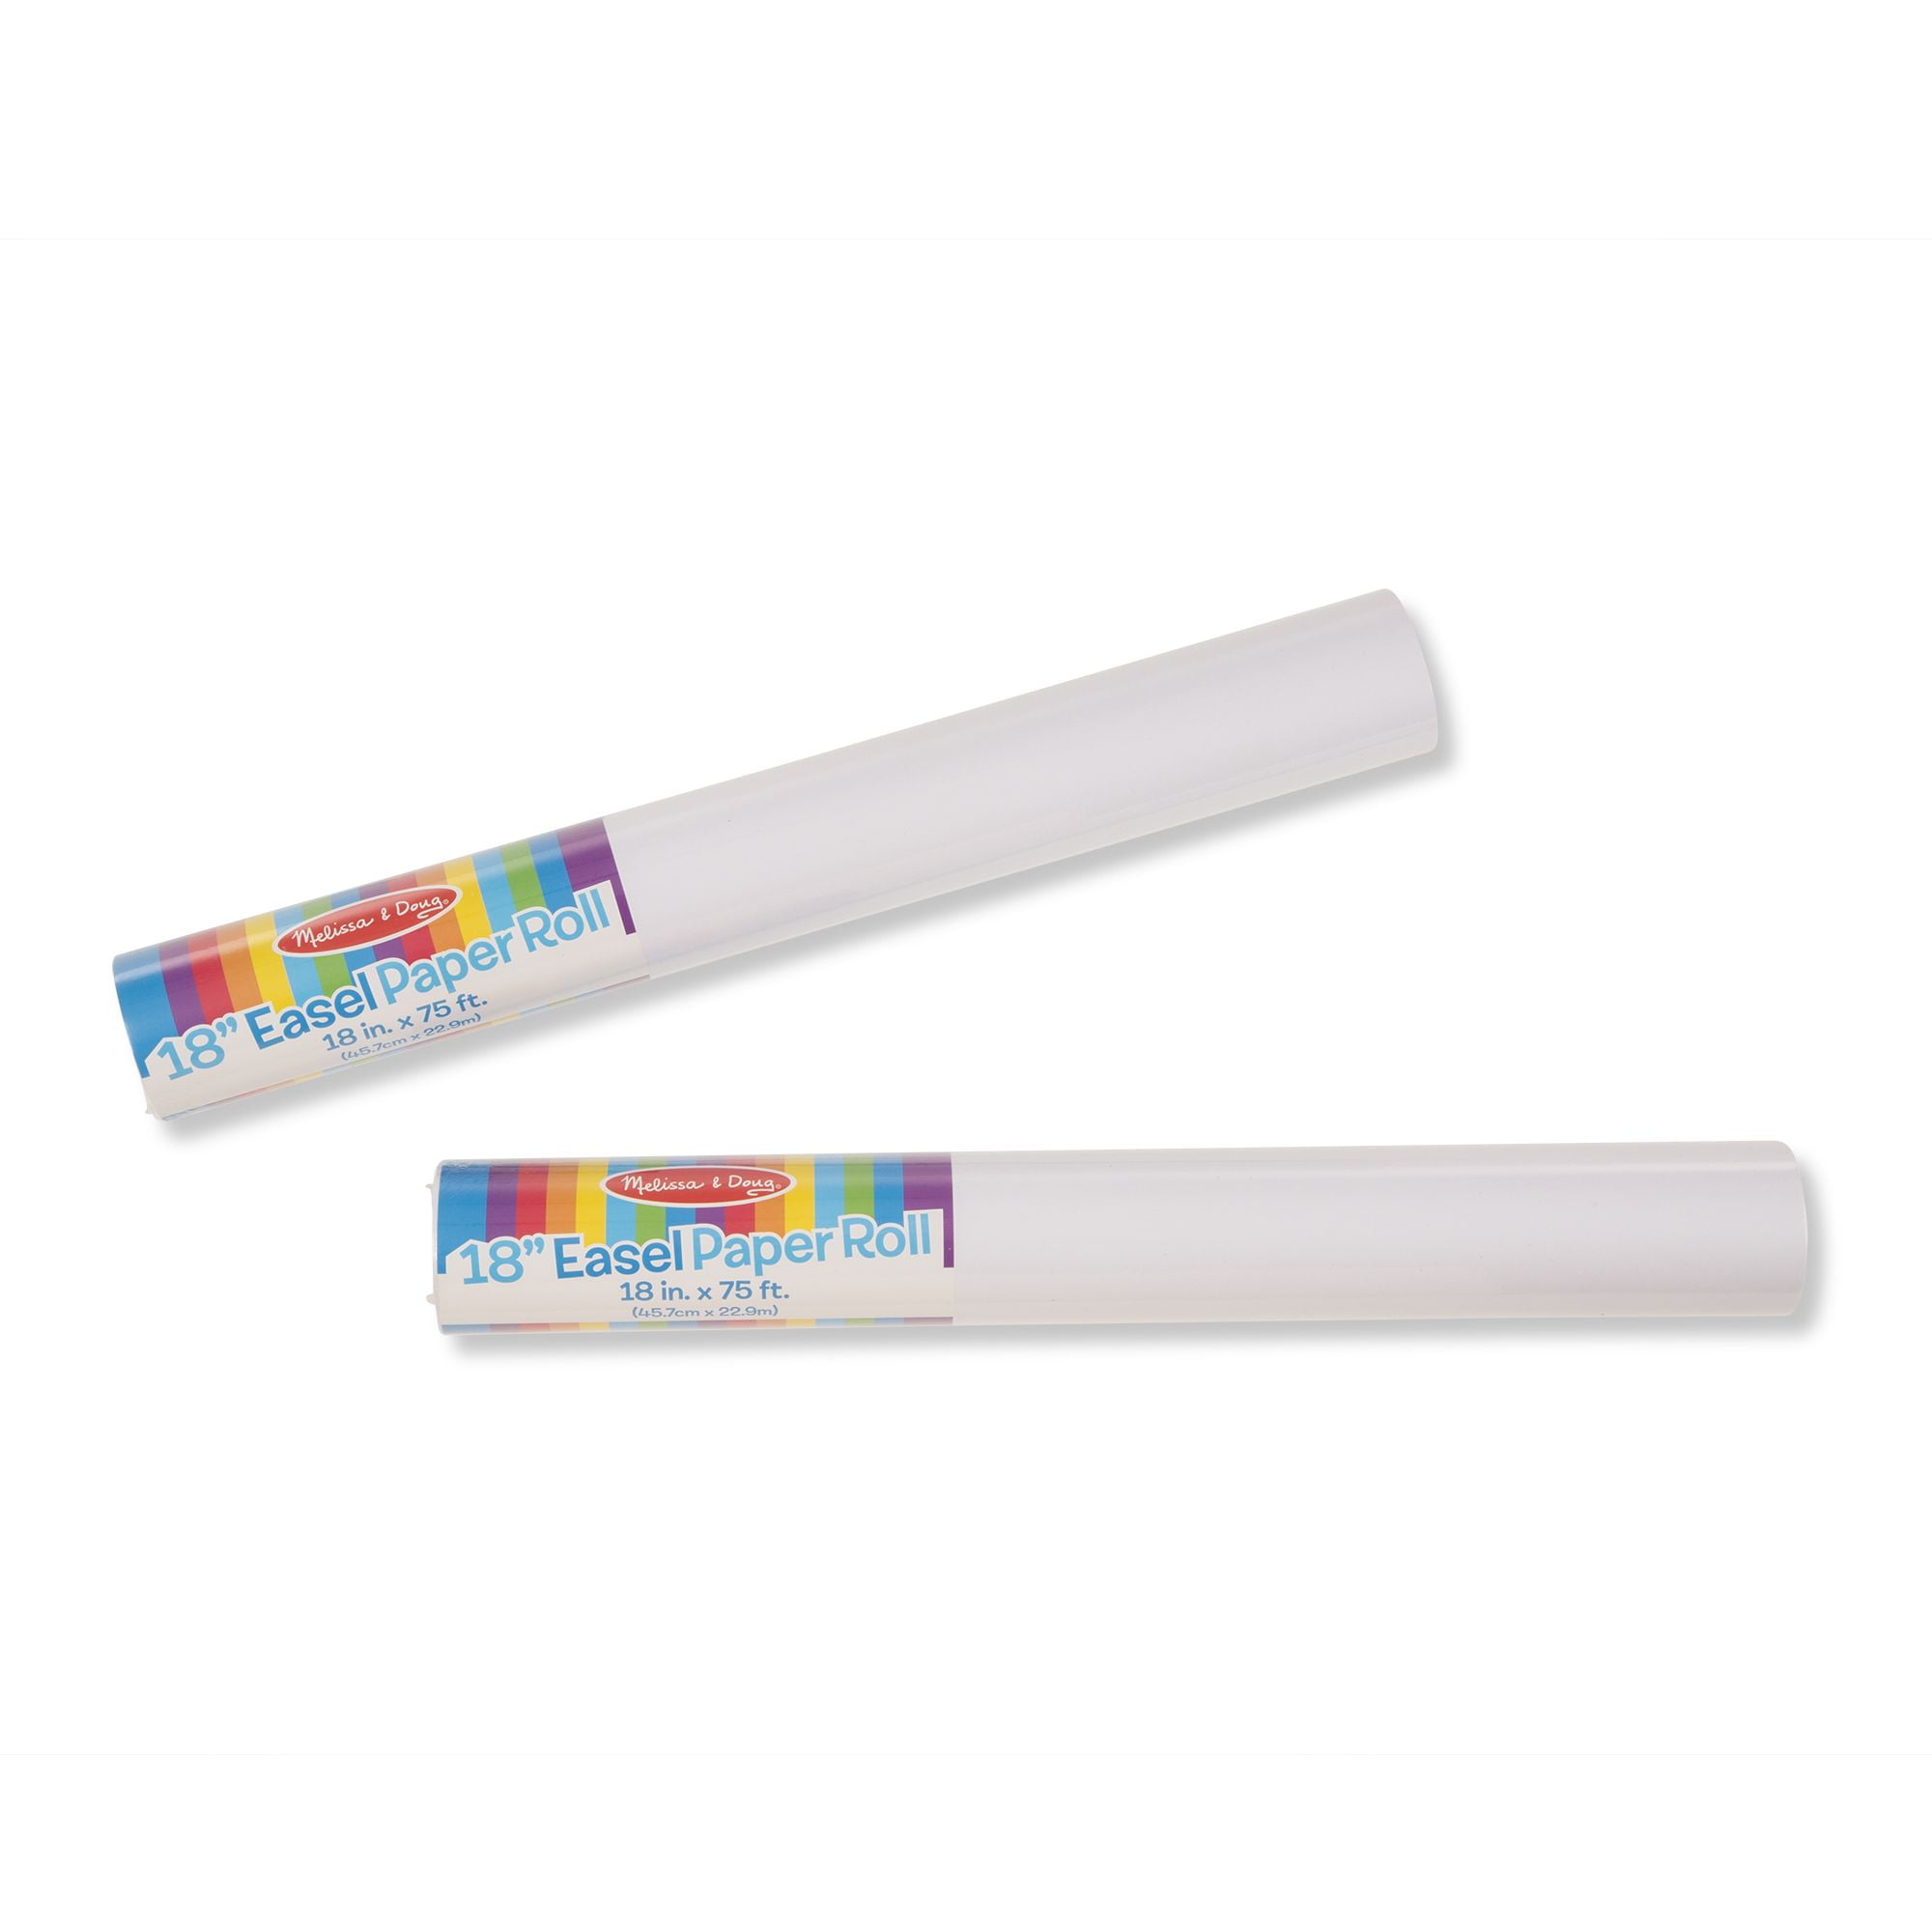 Melissa & Doug Deluxe Easel Paper Roll Replacement - 2-Pack, White